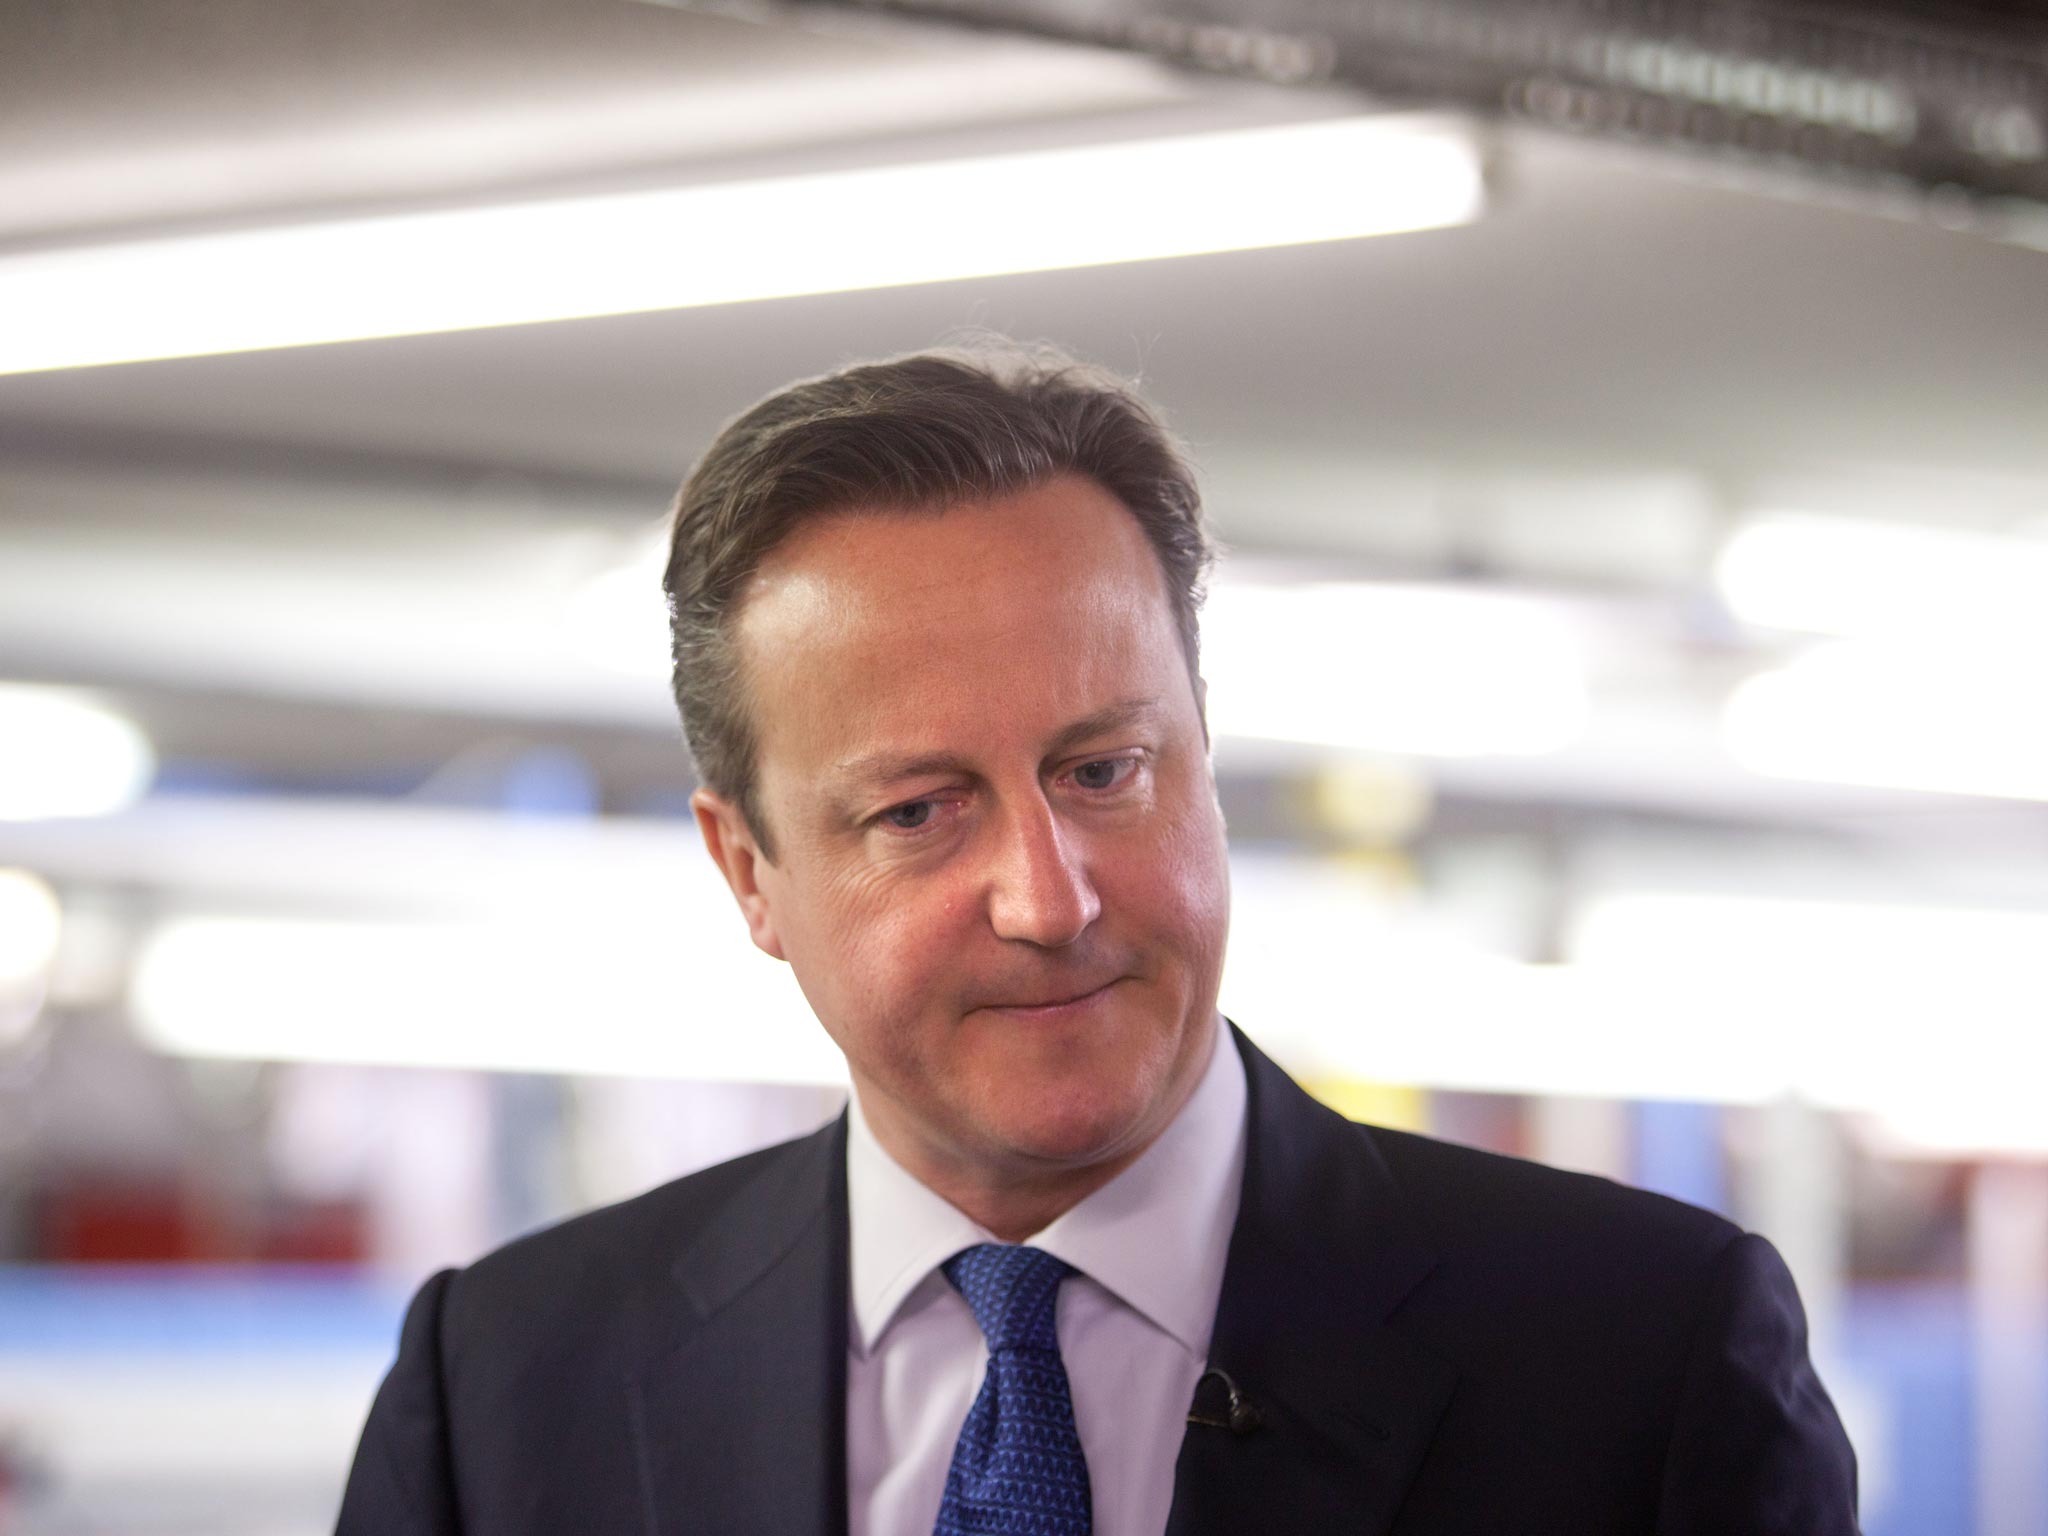 David Cameron's 'compassionate conservatism' is now lying on its back